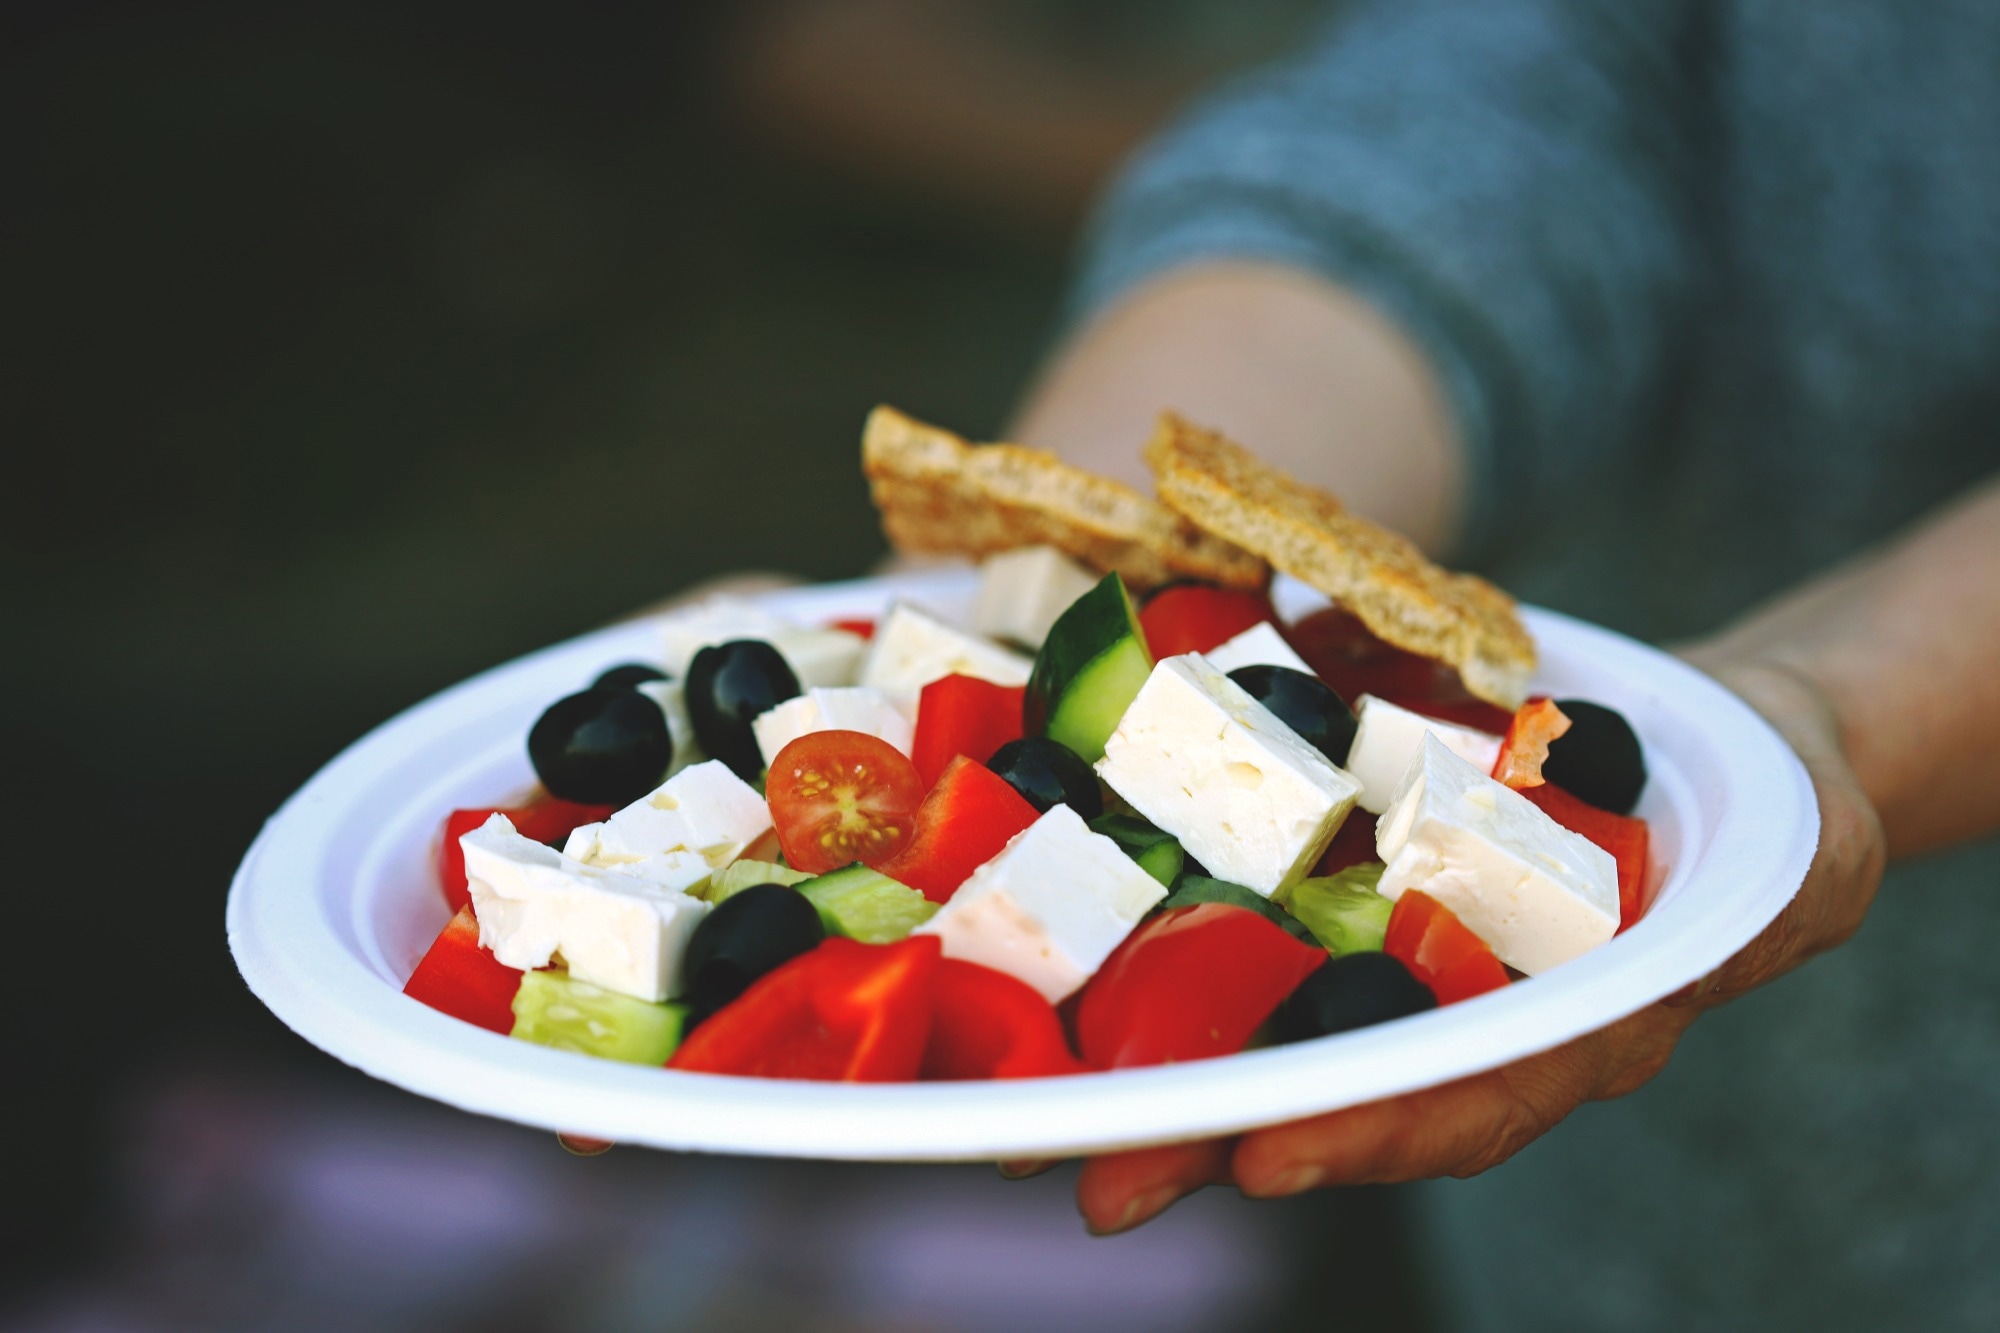 Systematic review: Primary prevention of cardiovascular disease in women with a Mediterranean diet: systematic review and meta-analysis